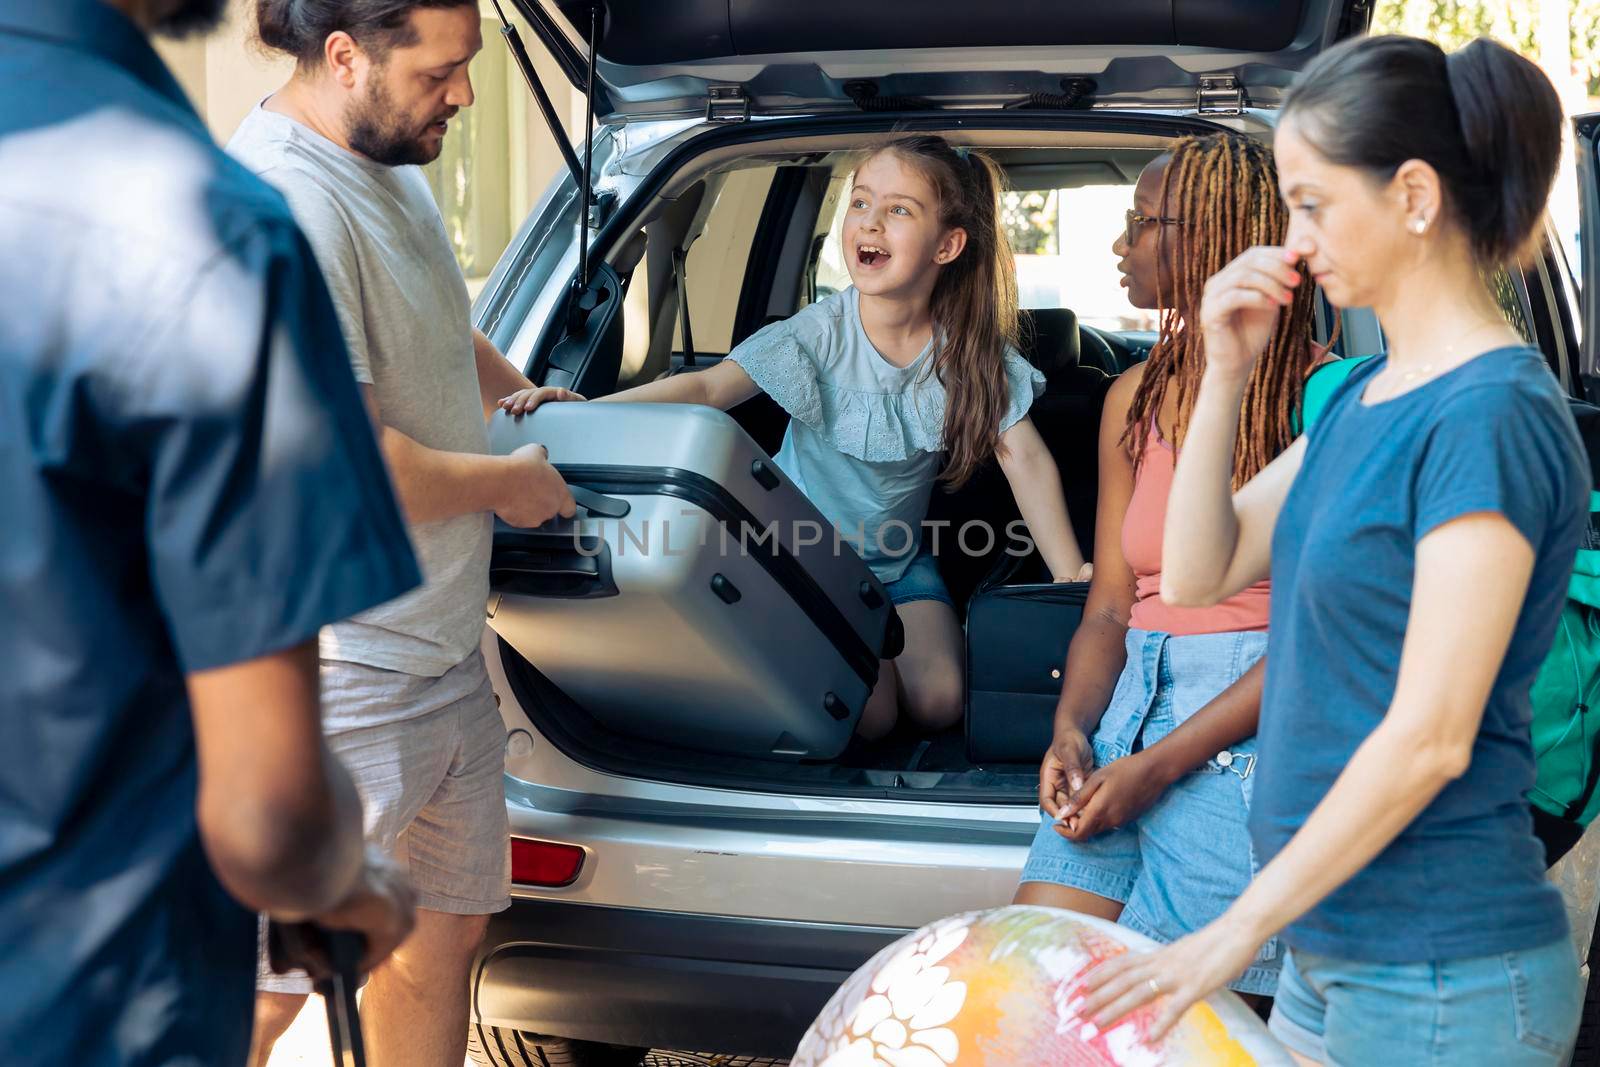 Little child travelling on vacation with family, preparing to go to seaside holiday during summer. Diverse people and friends loading suitcase and trolley in car trunk, leaving on journey trip.